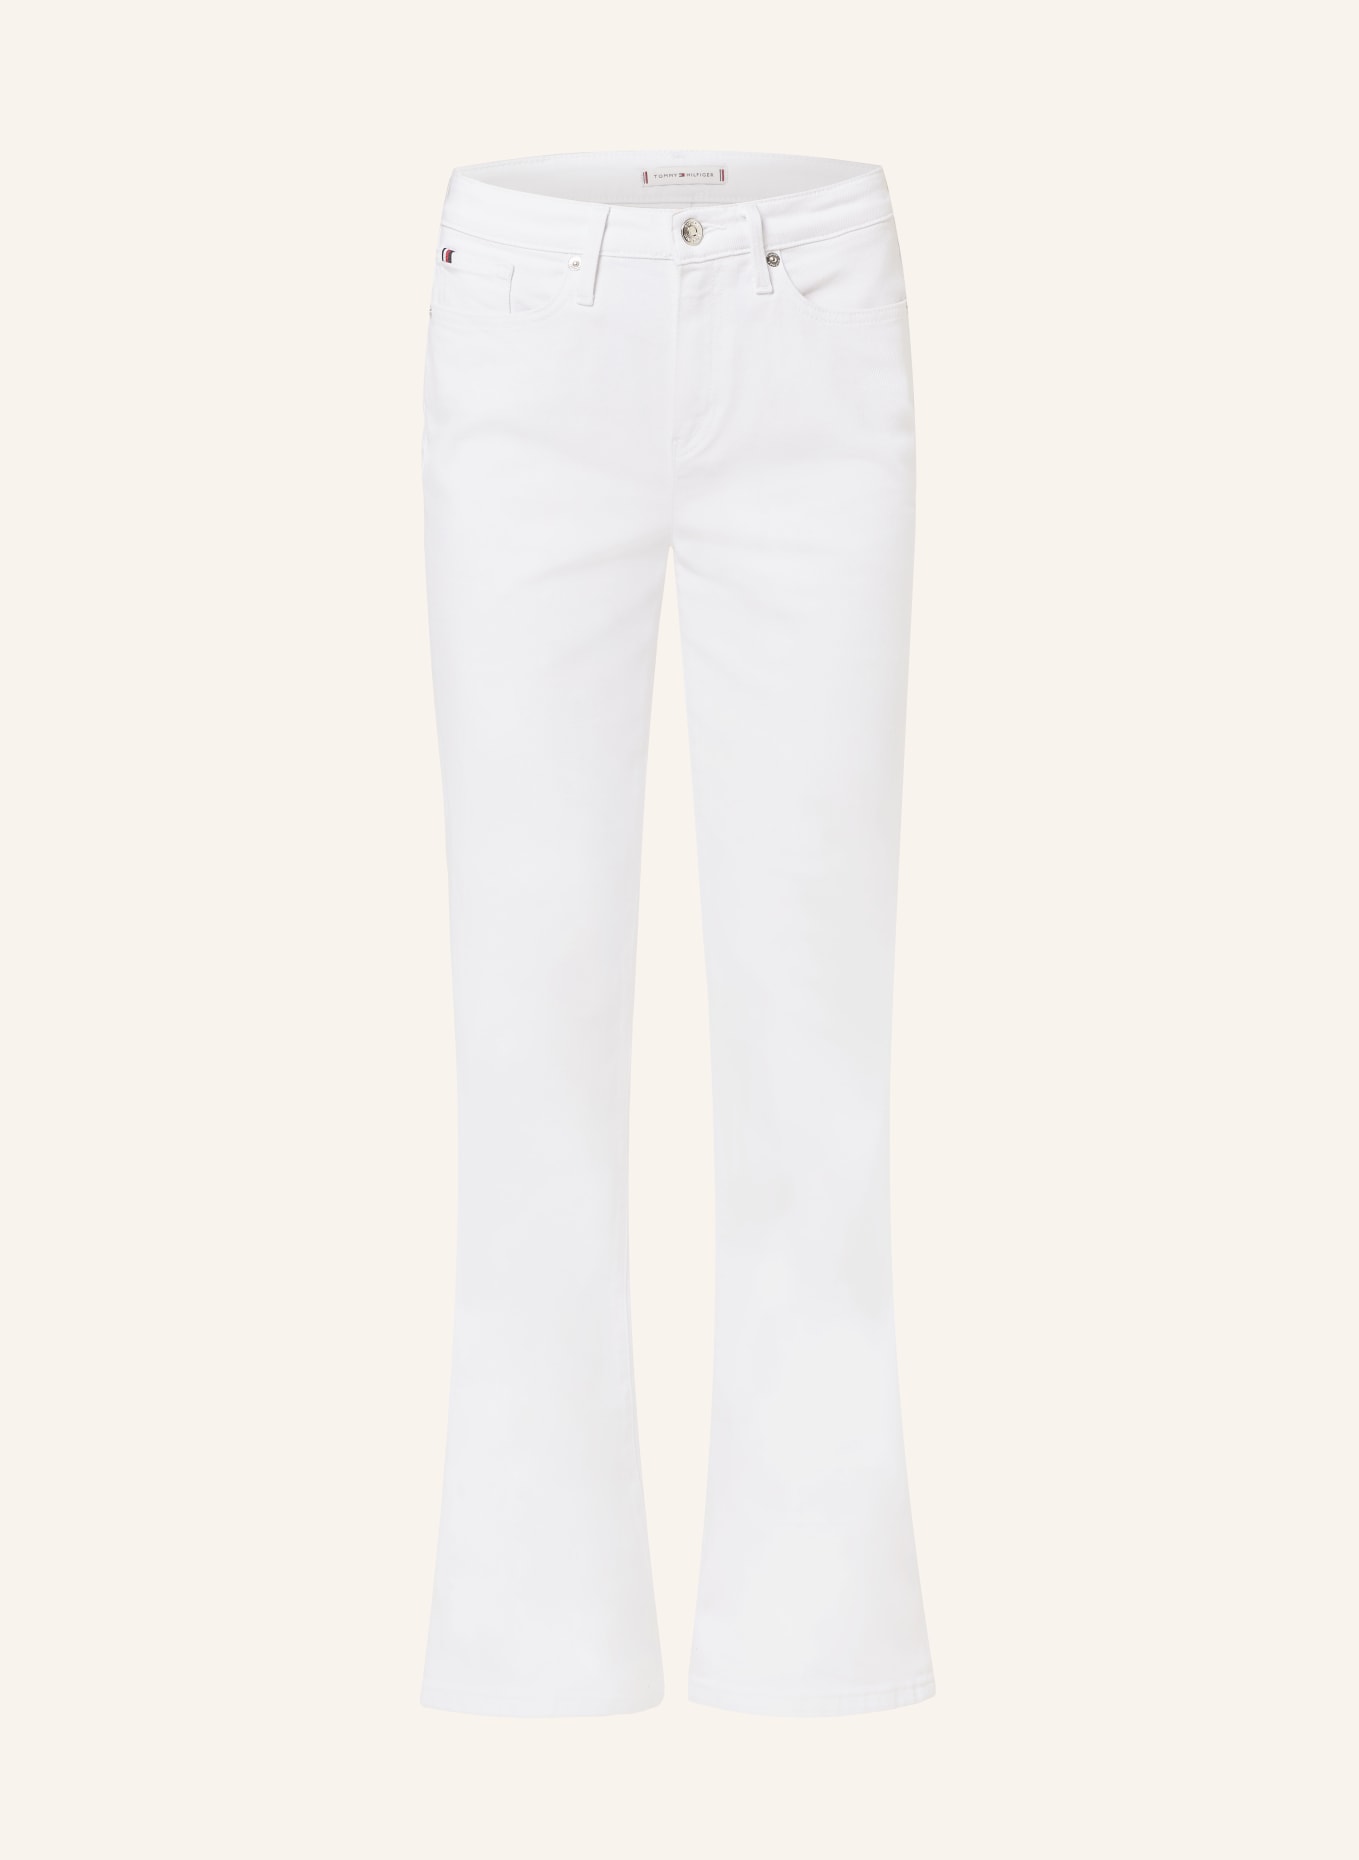 TOMMY HILFIGER Bootcut Jeans, Farbe: YCF TH OPTIC WHITE (Bild 1)